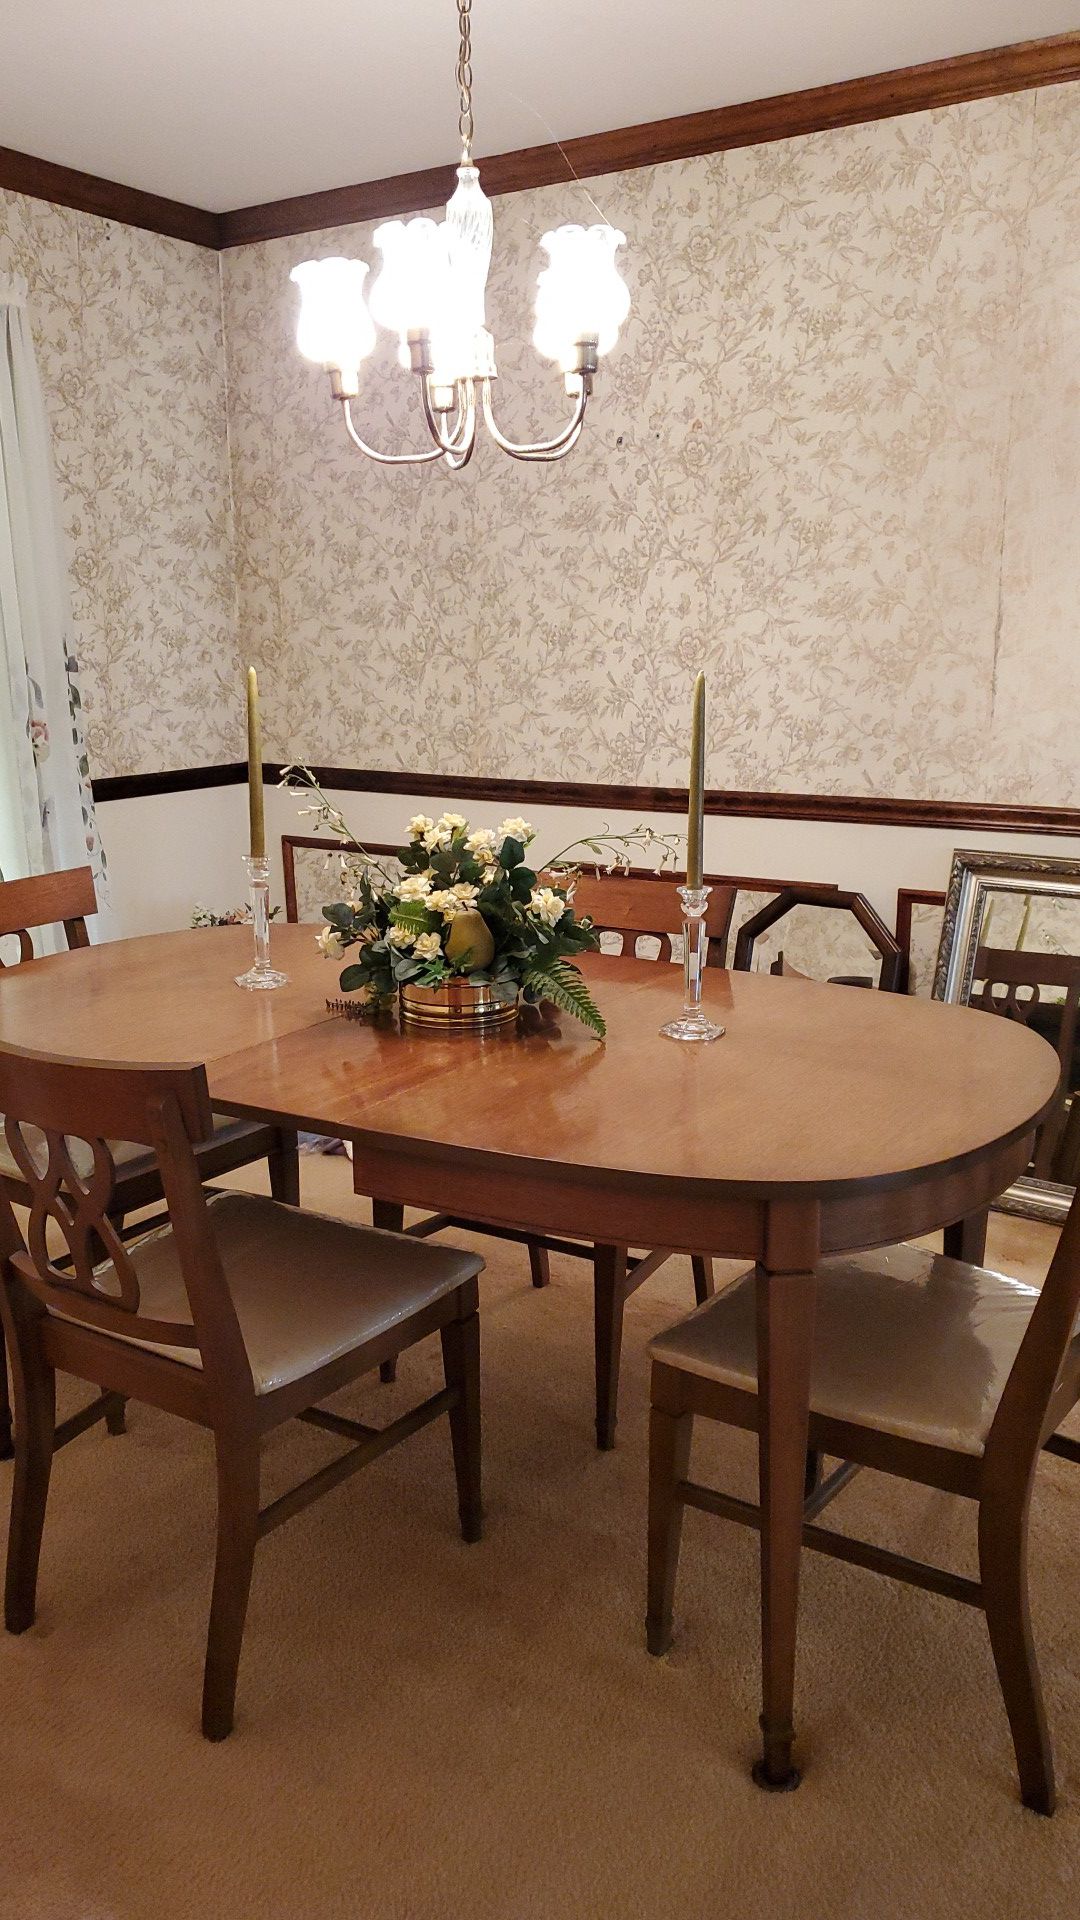 Wood Dining Table & 4 Chairs, Antique